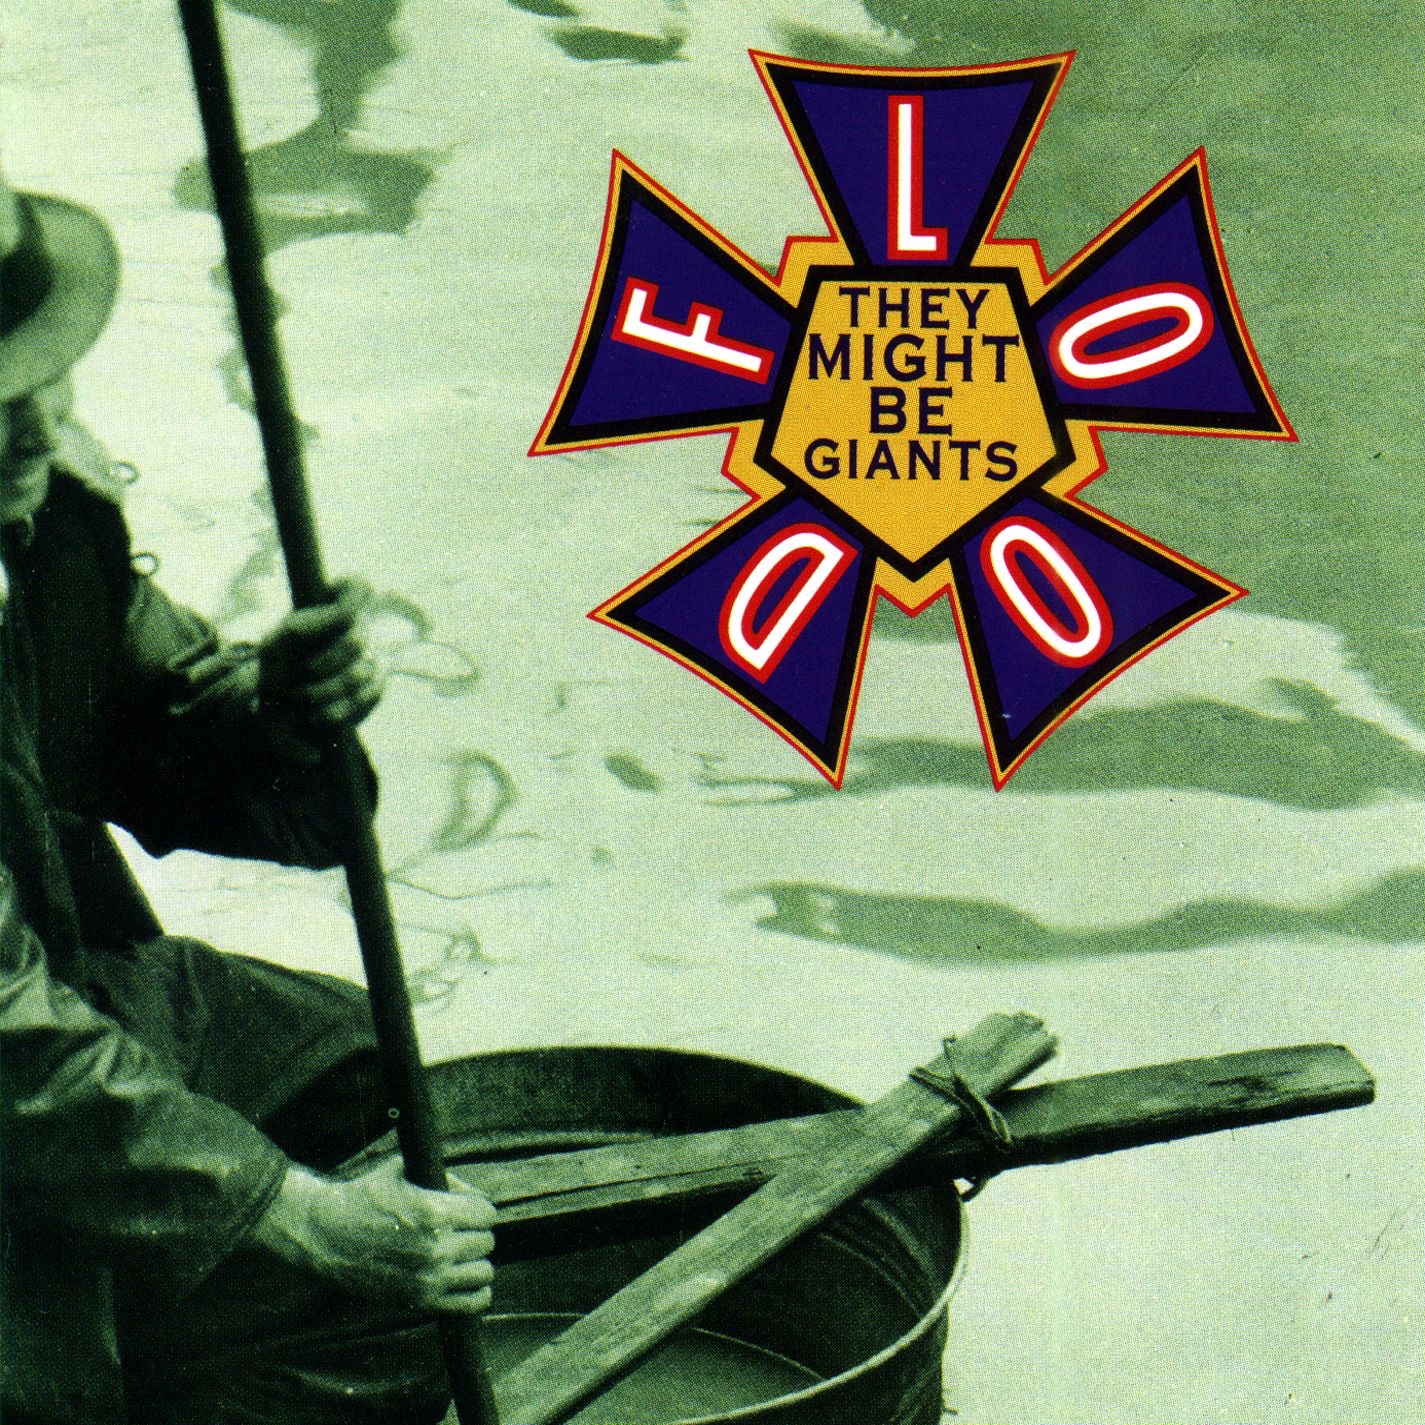 Art for Istanbul by They Might Be Giants